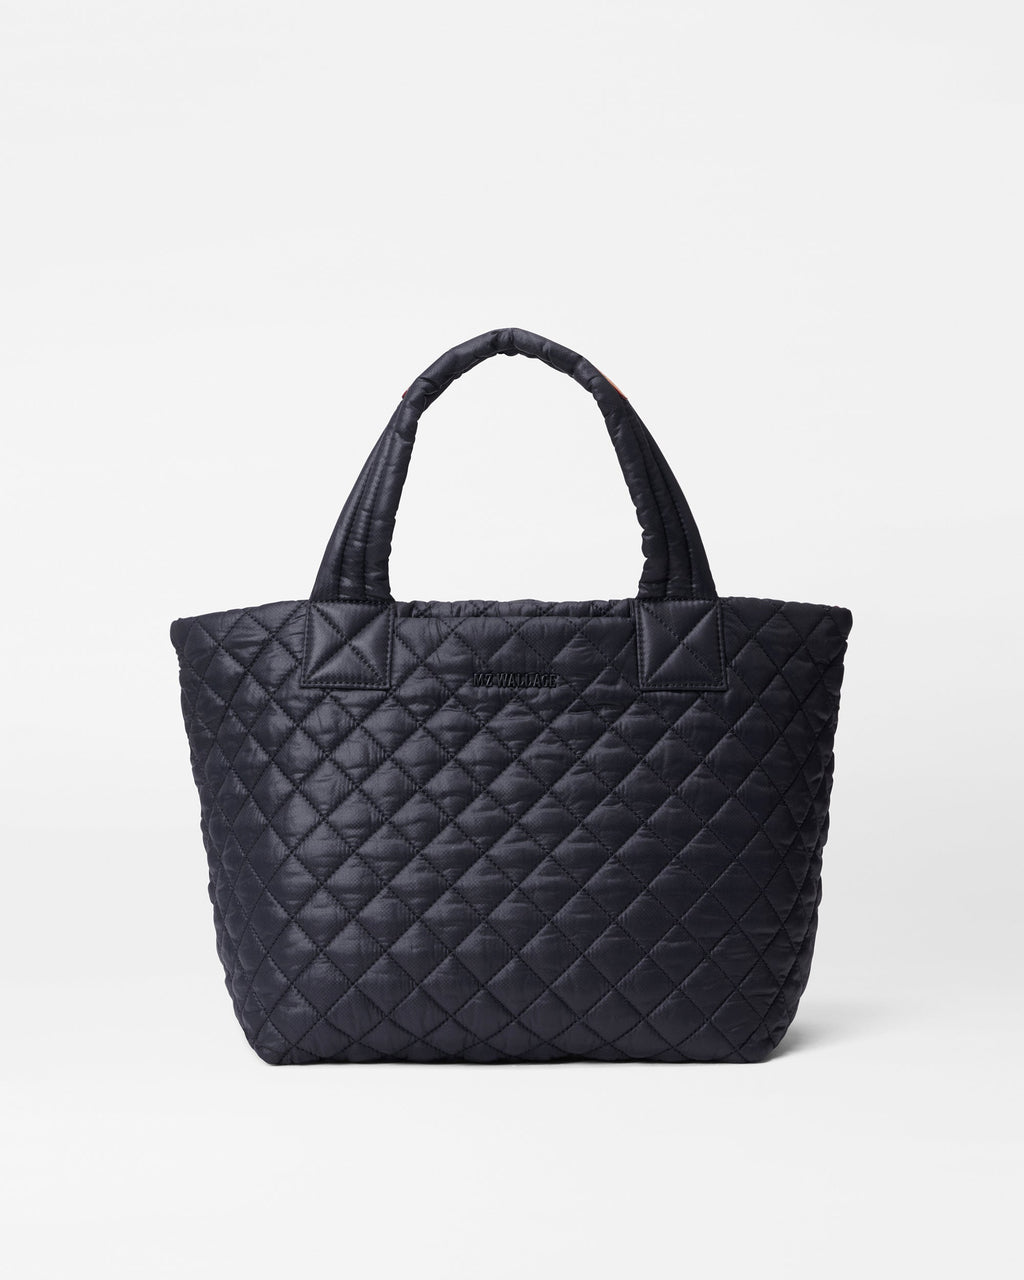 MZ Wallace Deluxe Large Metro Tote